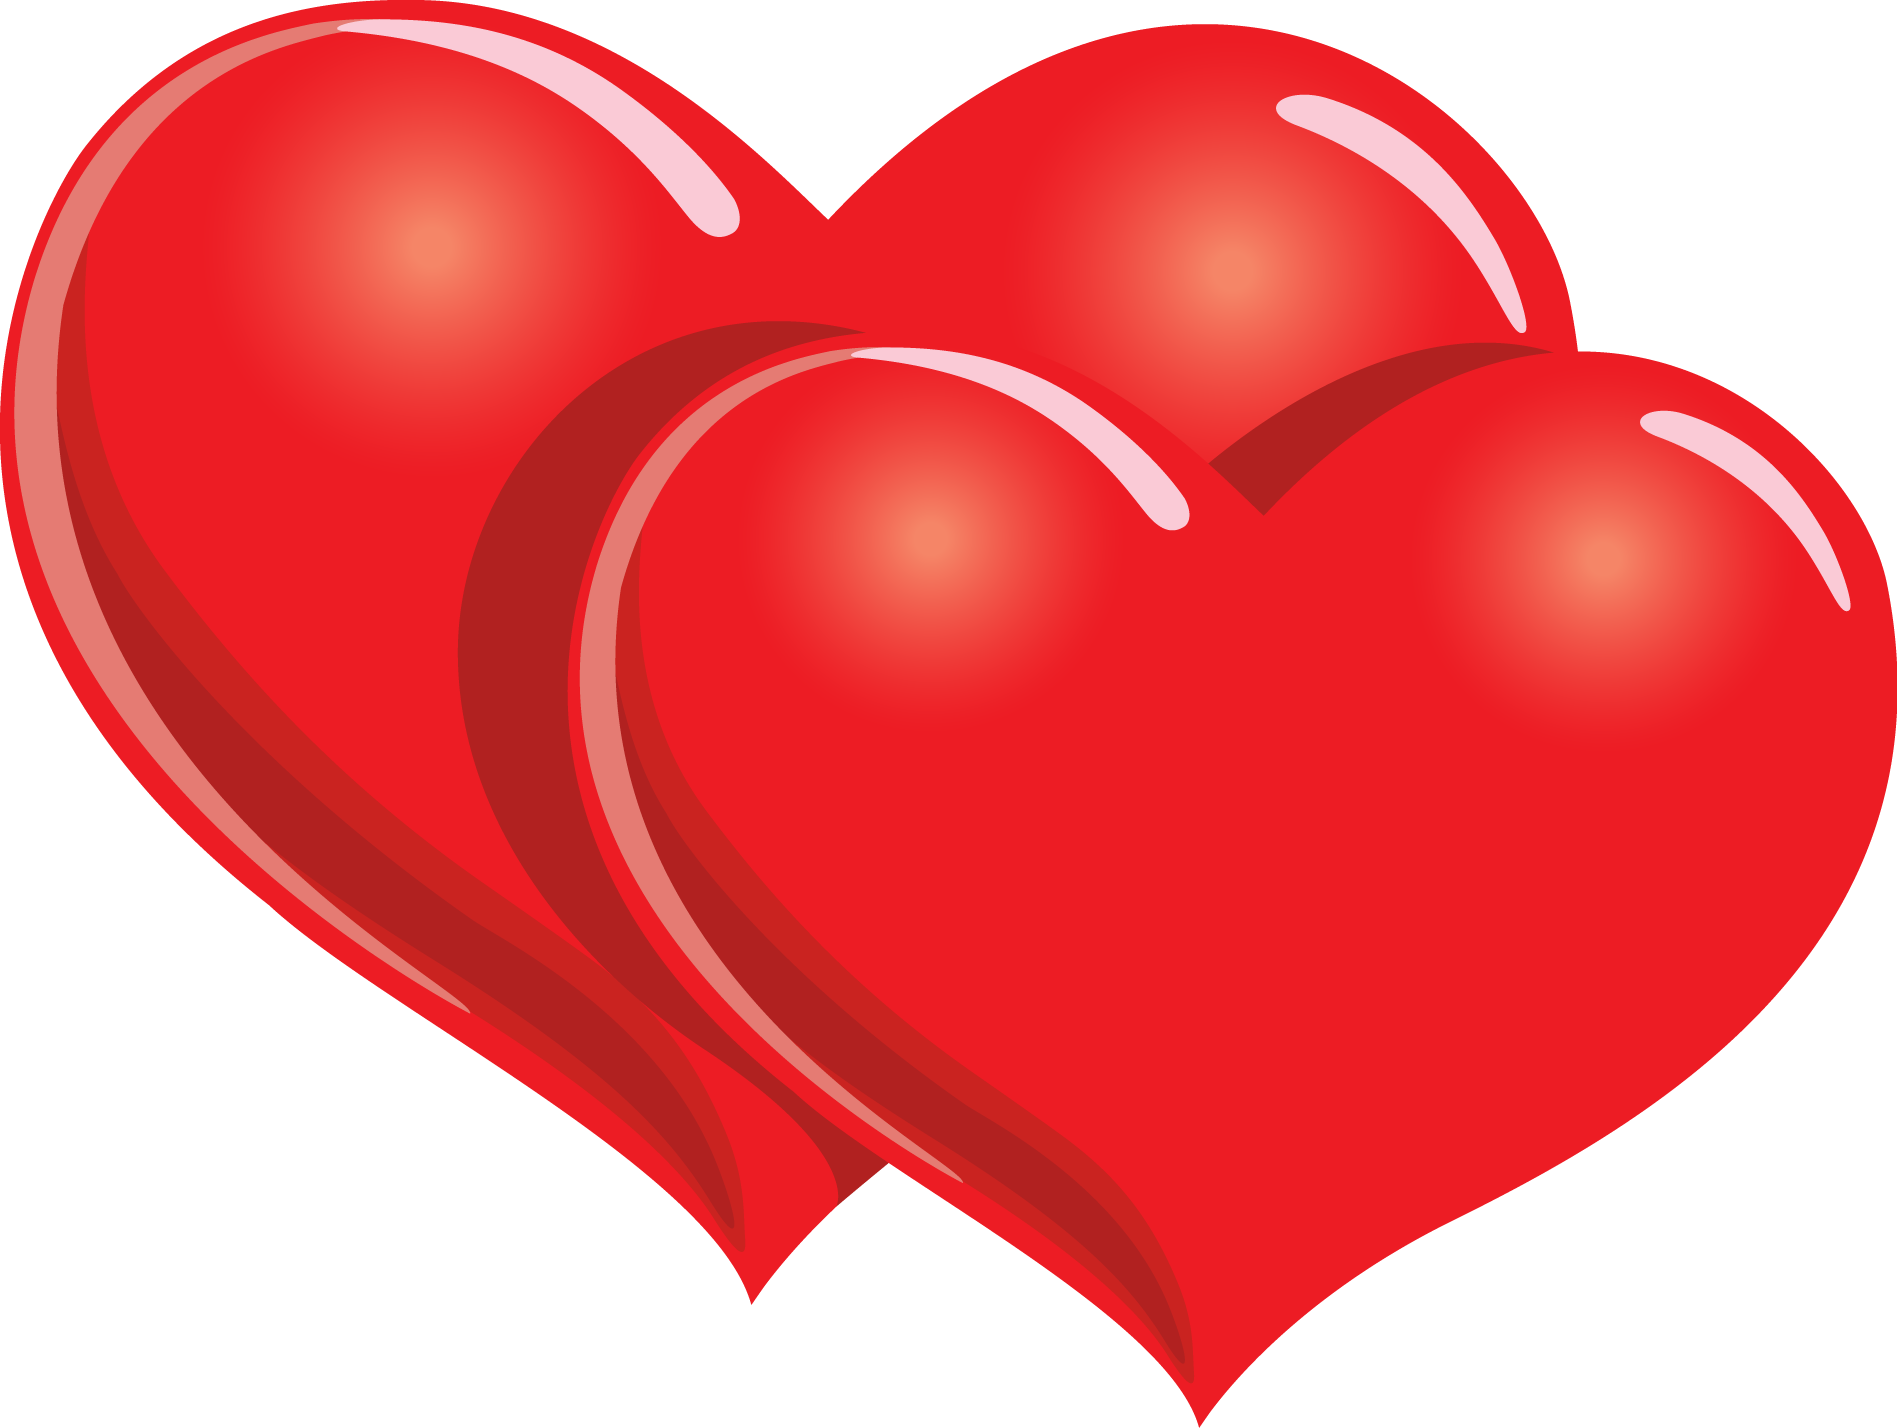 free clipart valentines day hearts - photo #41